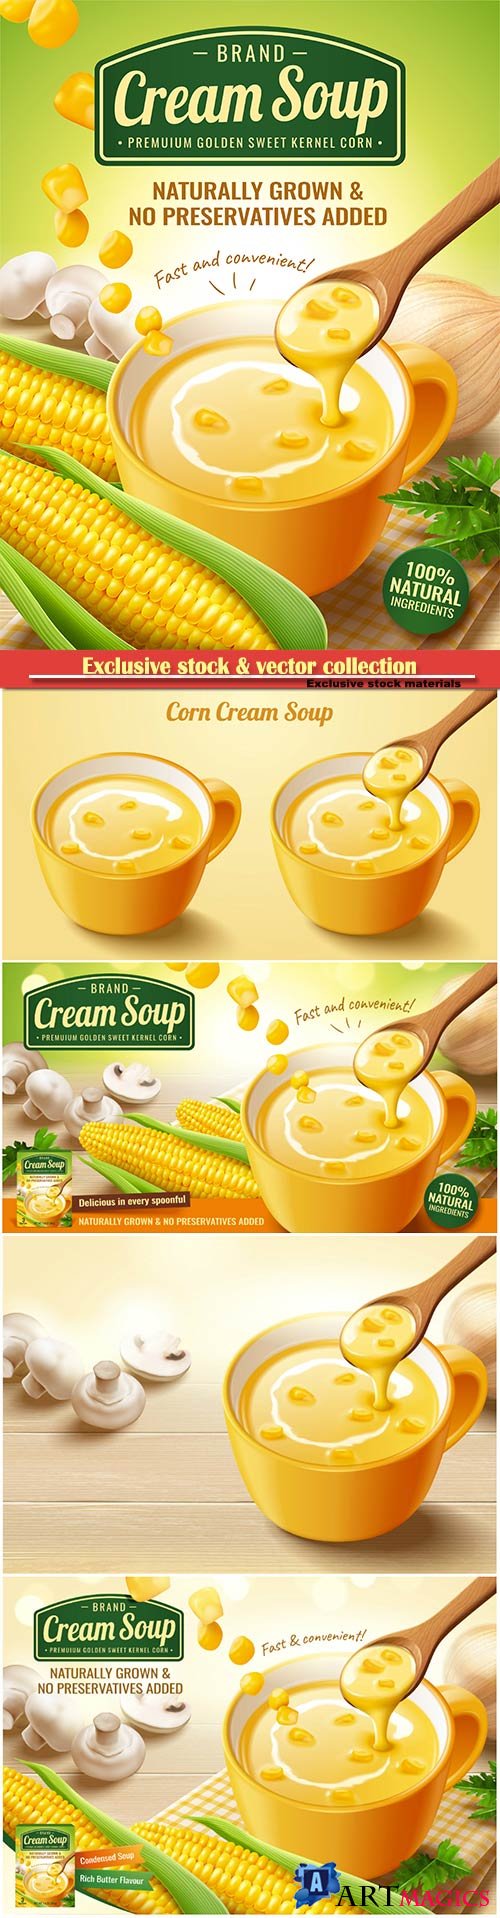 Instant corn cream soup ads with fresh corncob and mushroom in 3d illustration